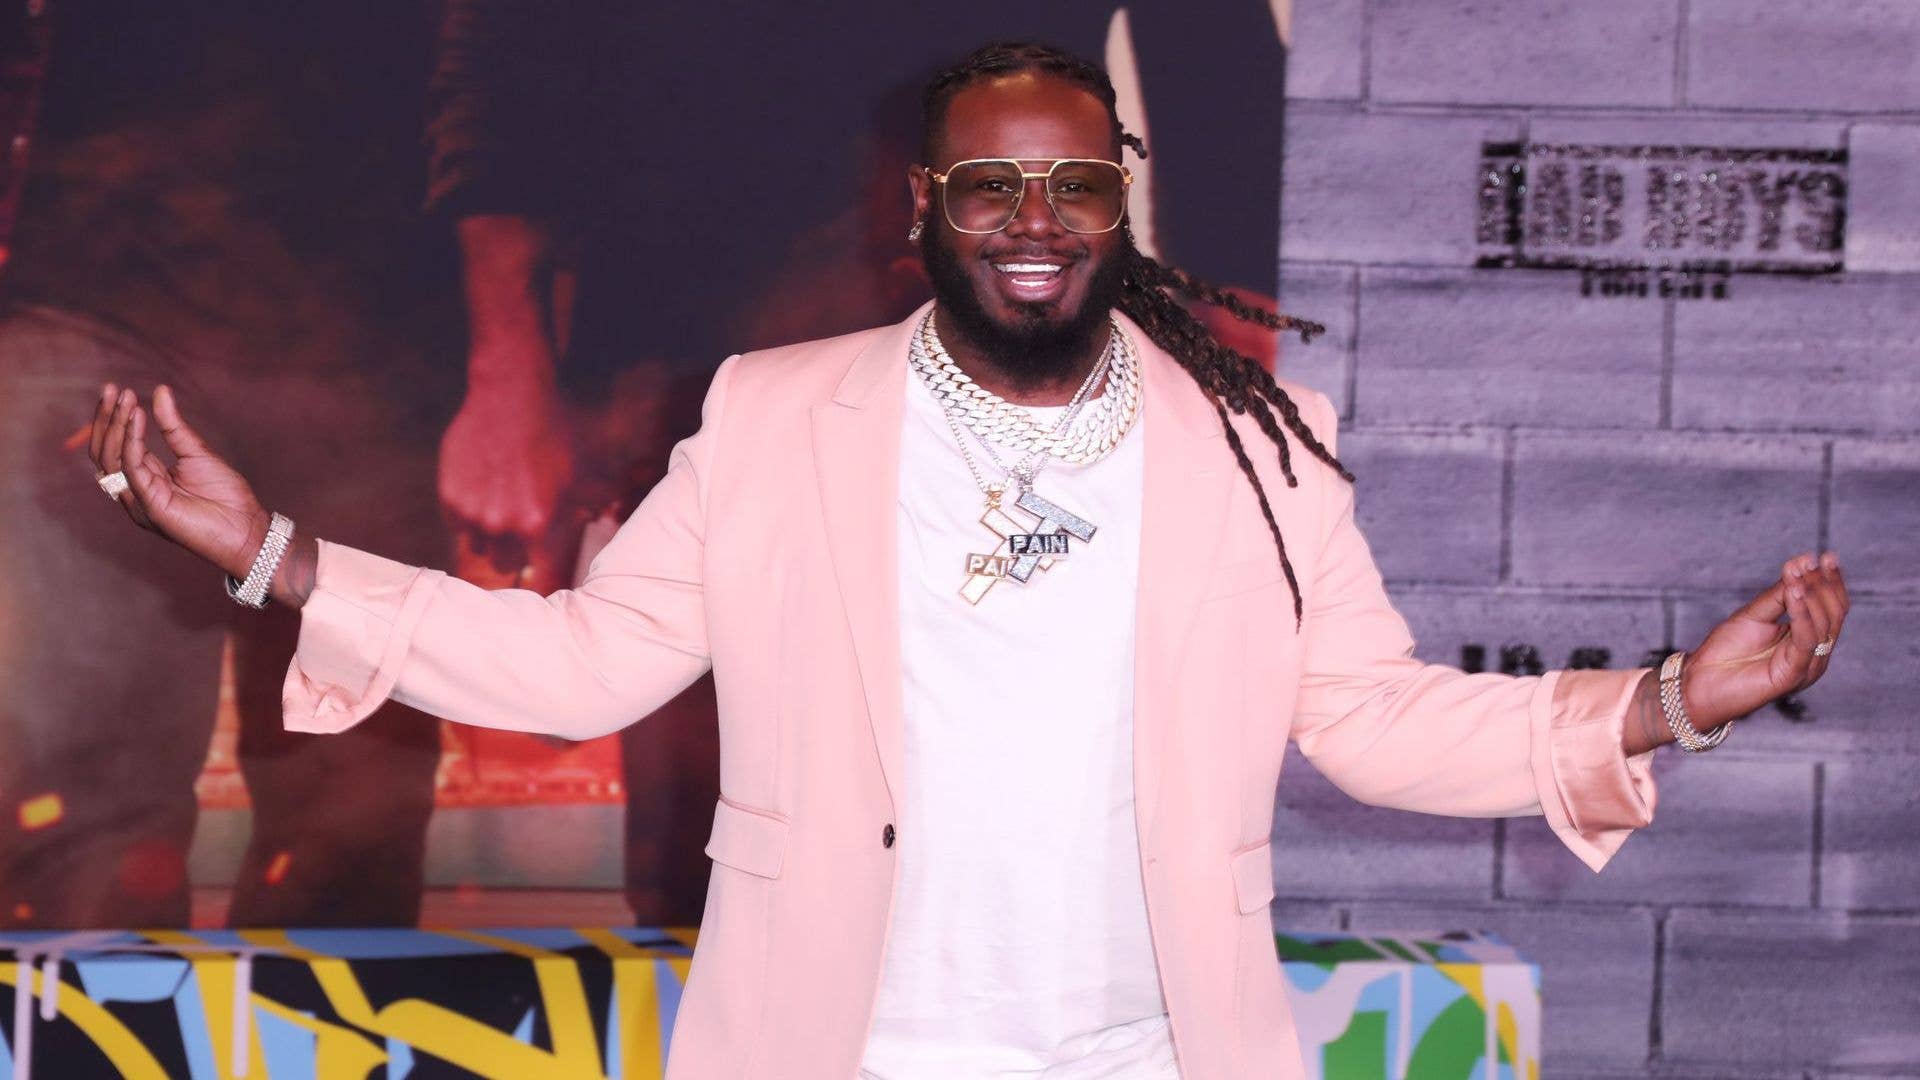 T-Pain at a red carpet.